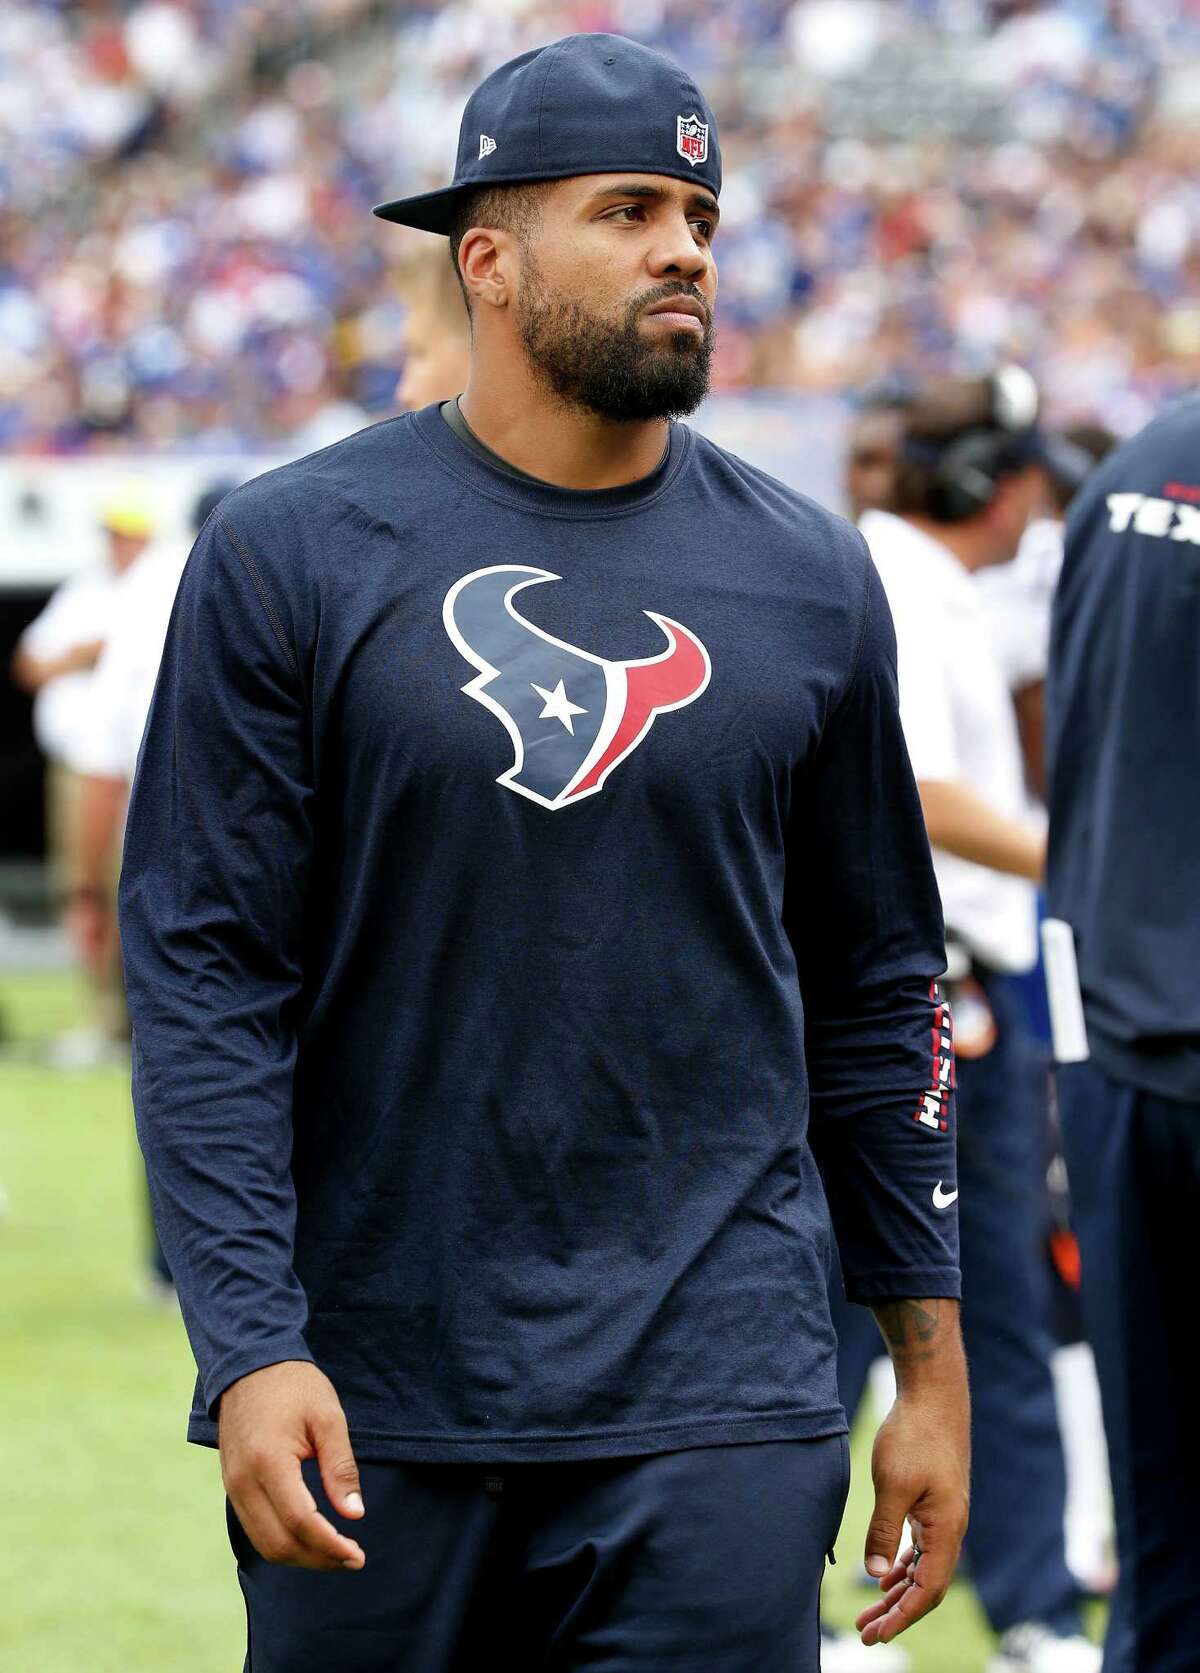 After seven years with the Texans, Arian Foster is the team's rushing leader with 6,472 yards and 54 touchdowns.